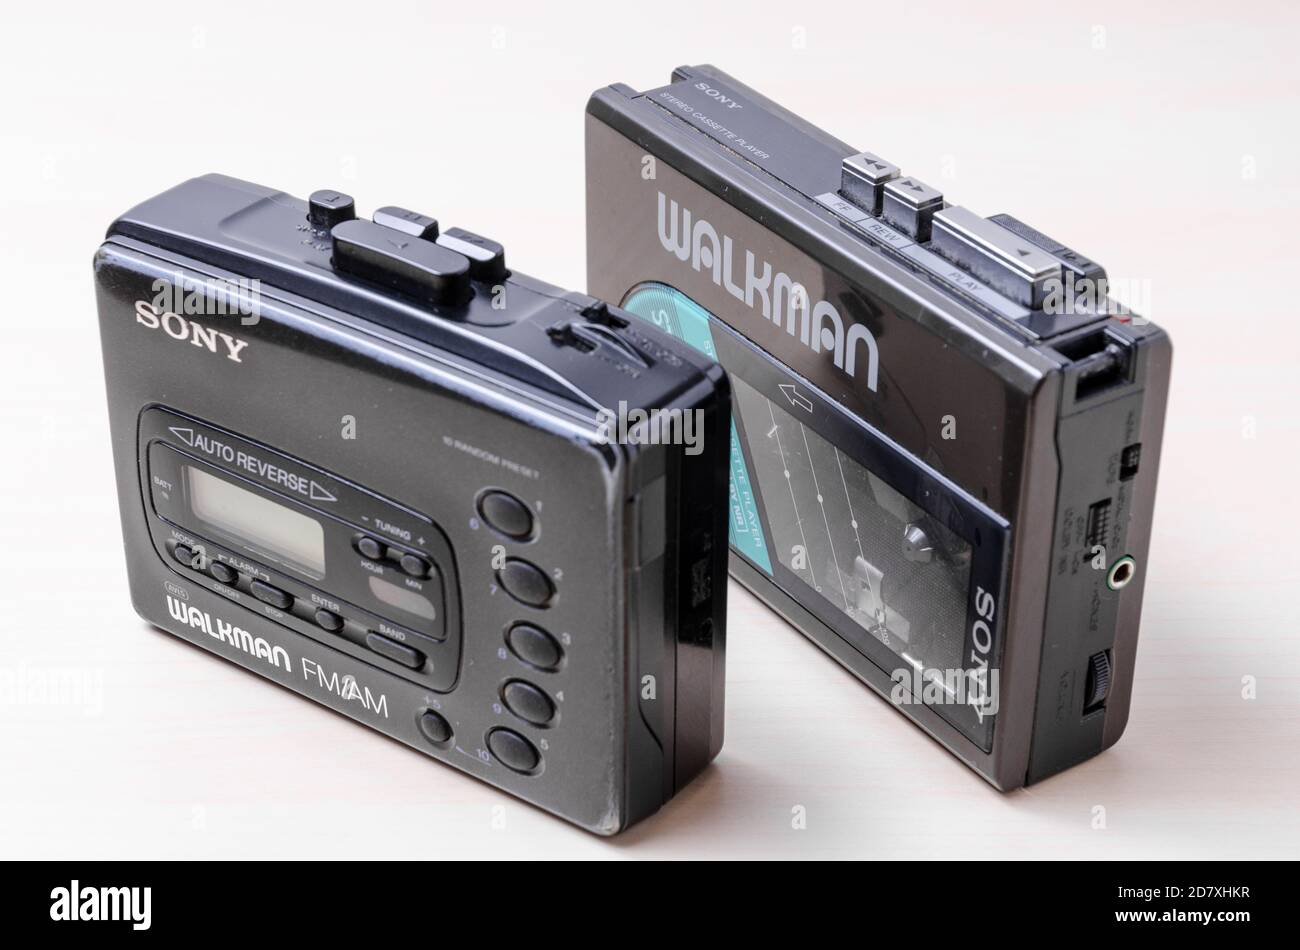 Sony Walkman Cassette Player WM-24, 1984 until 1987, compact audio music,  on wooden desk or table, flat lay, studio Stock Photo - Alamy